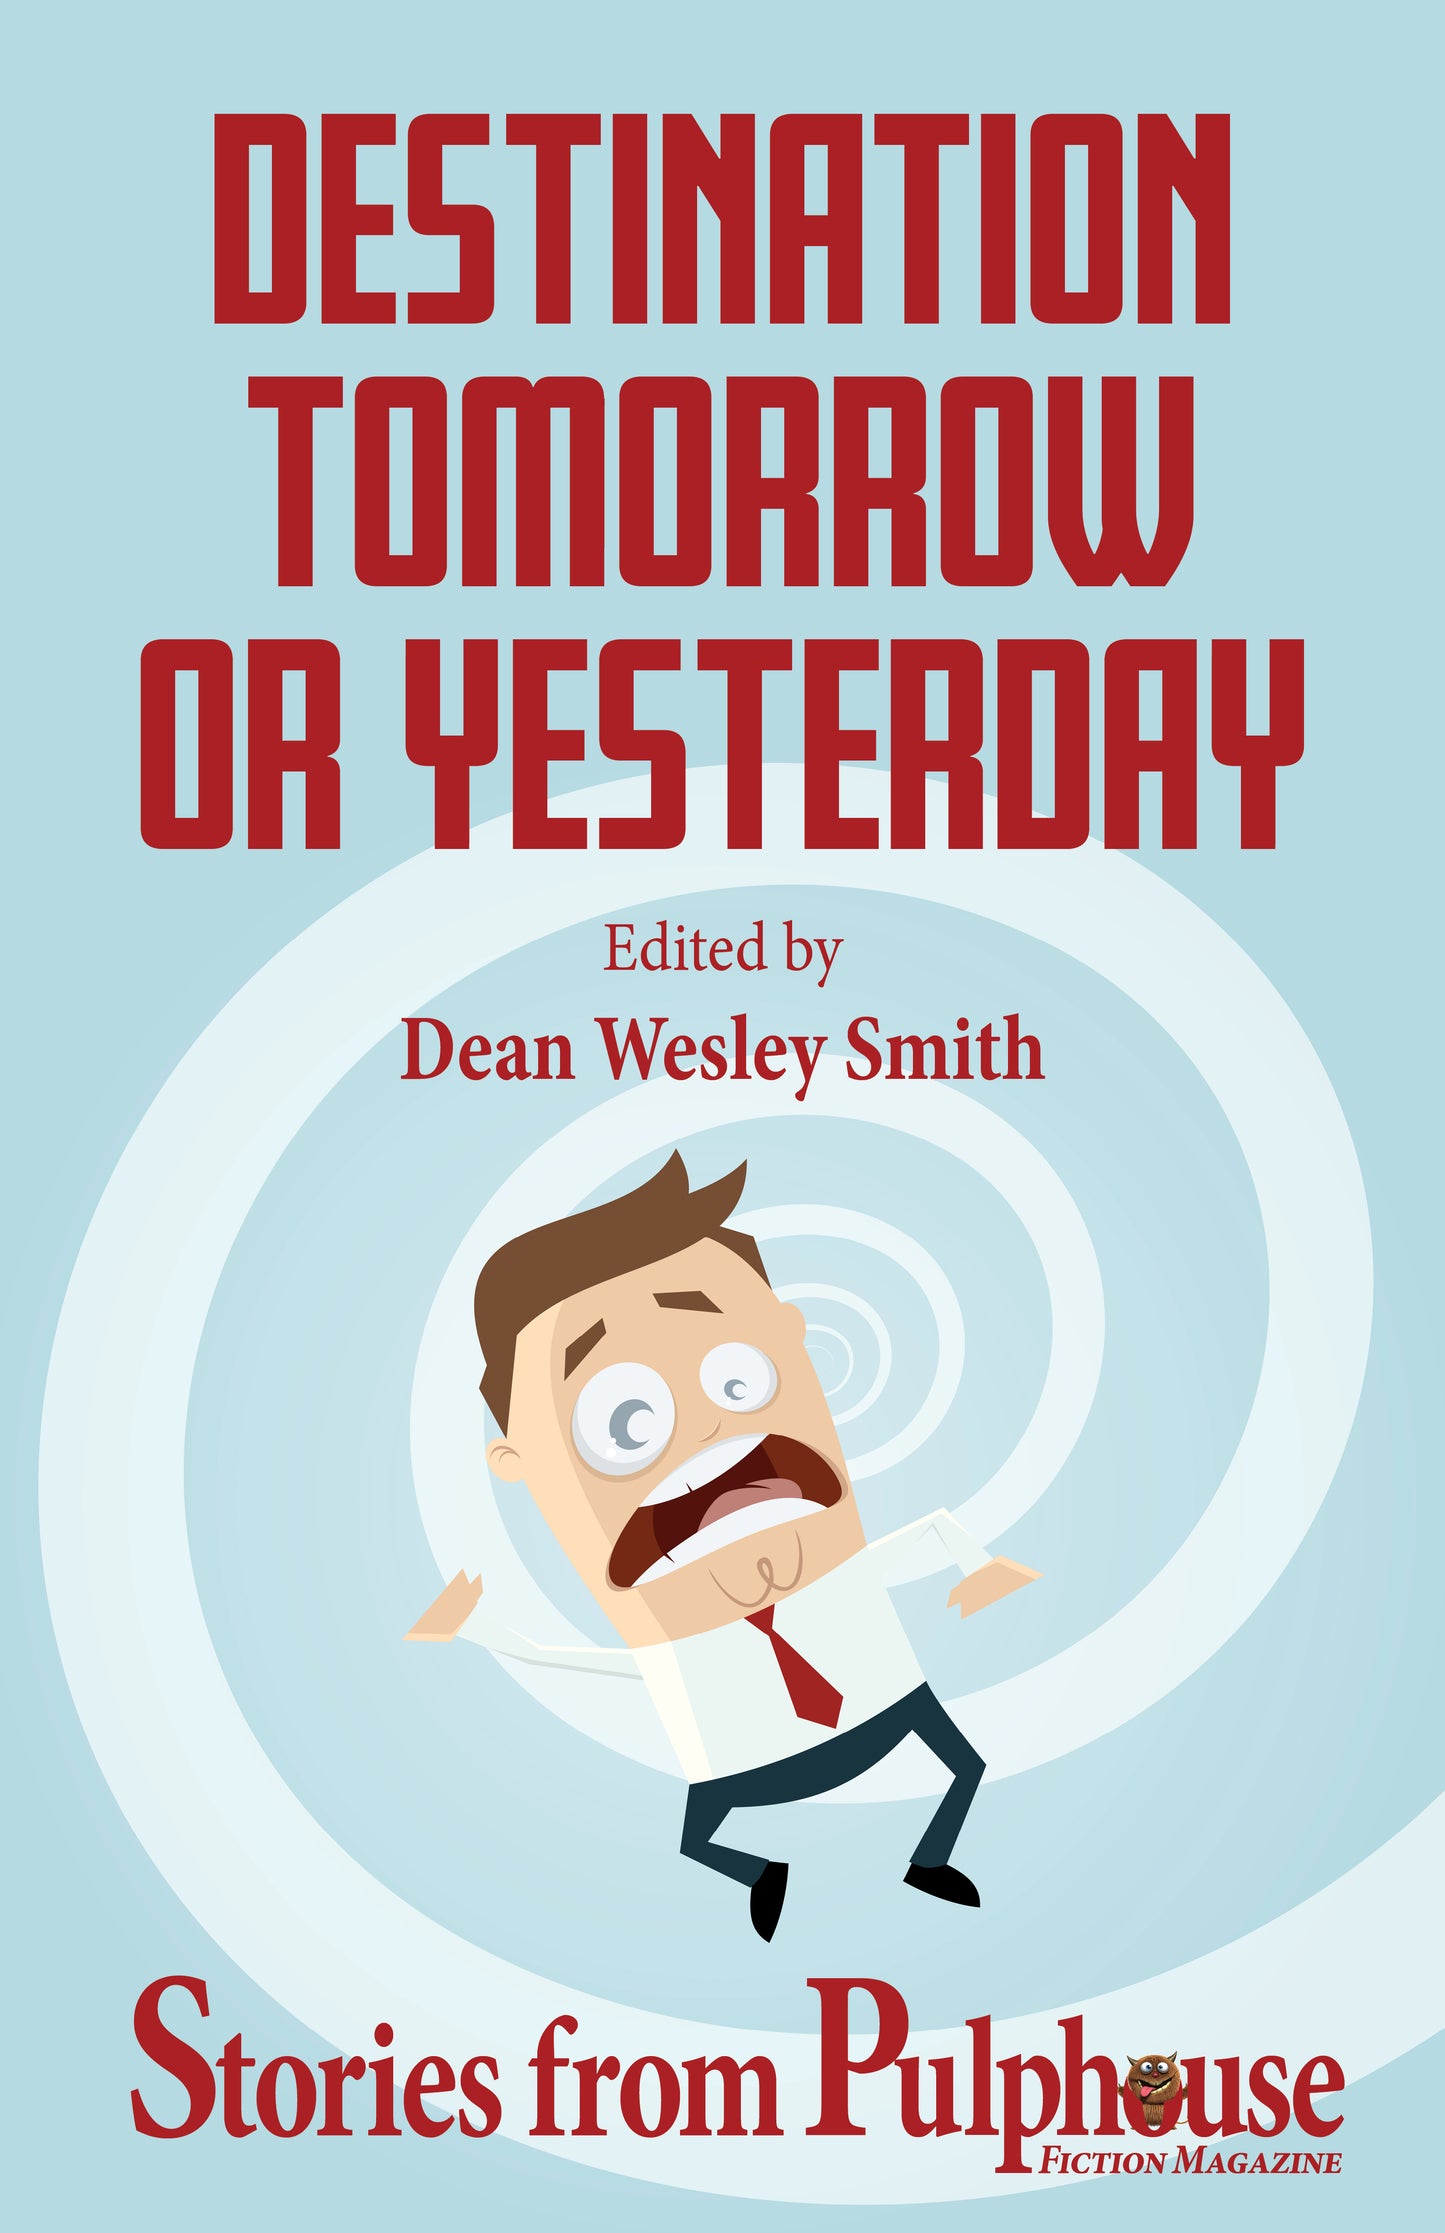 Destination Tomorrow or Yesterday: Stories from Pulphouse Fiction Magazine Edited by Dean Wesley Smith (EBOOK)